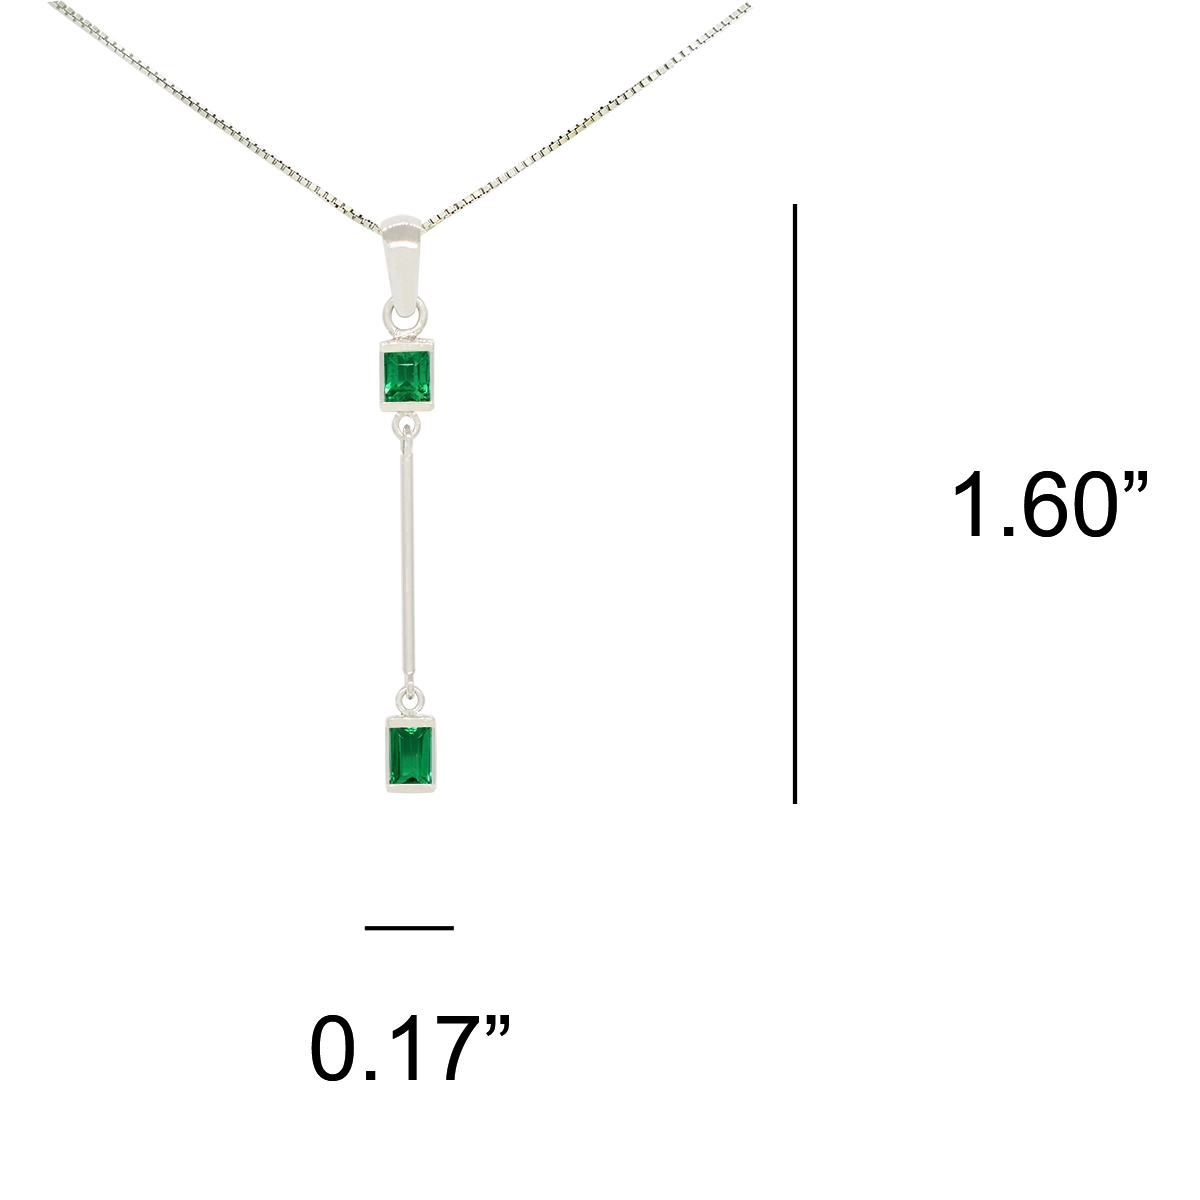 The dimensions of this emerald pendant are 1.60 inches high from the top of the bail, by 0.17 inches wide